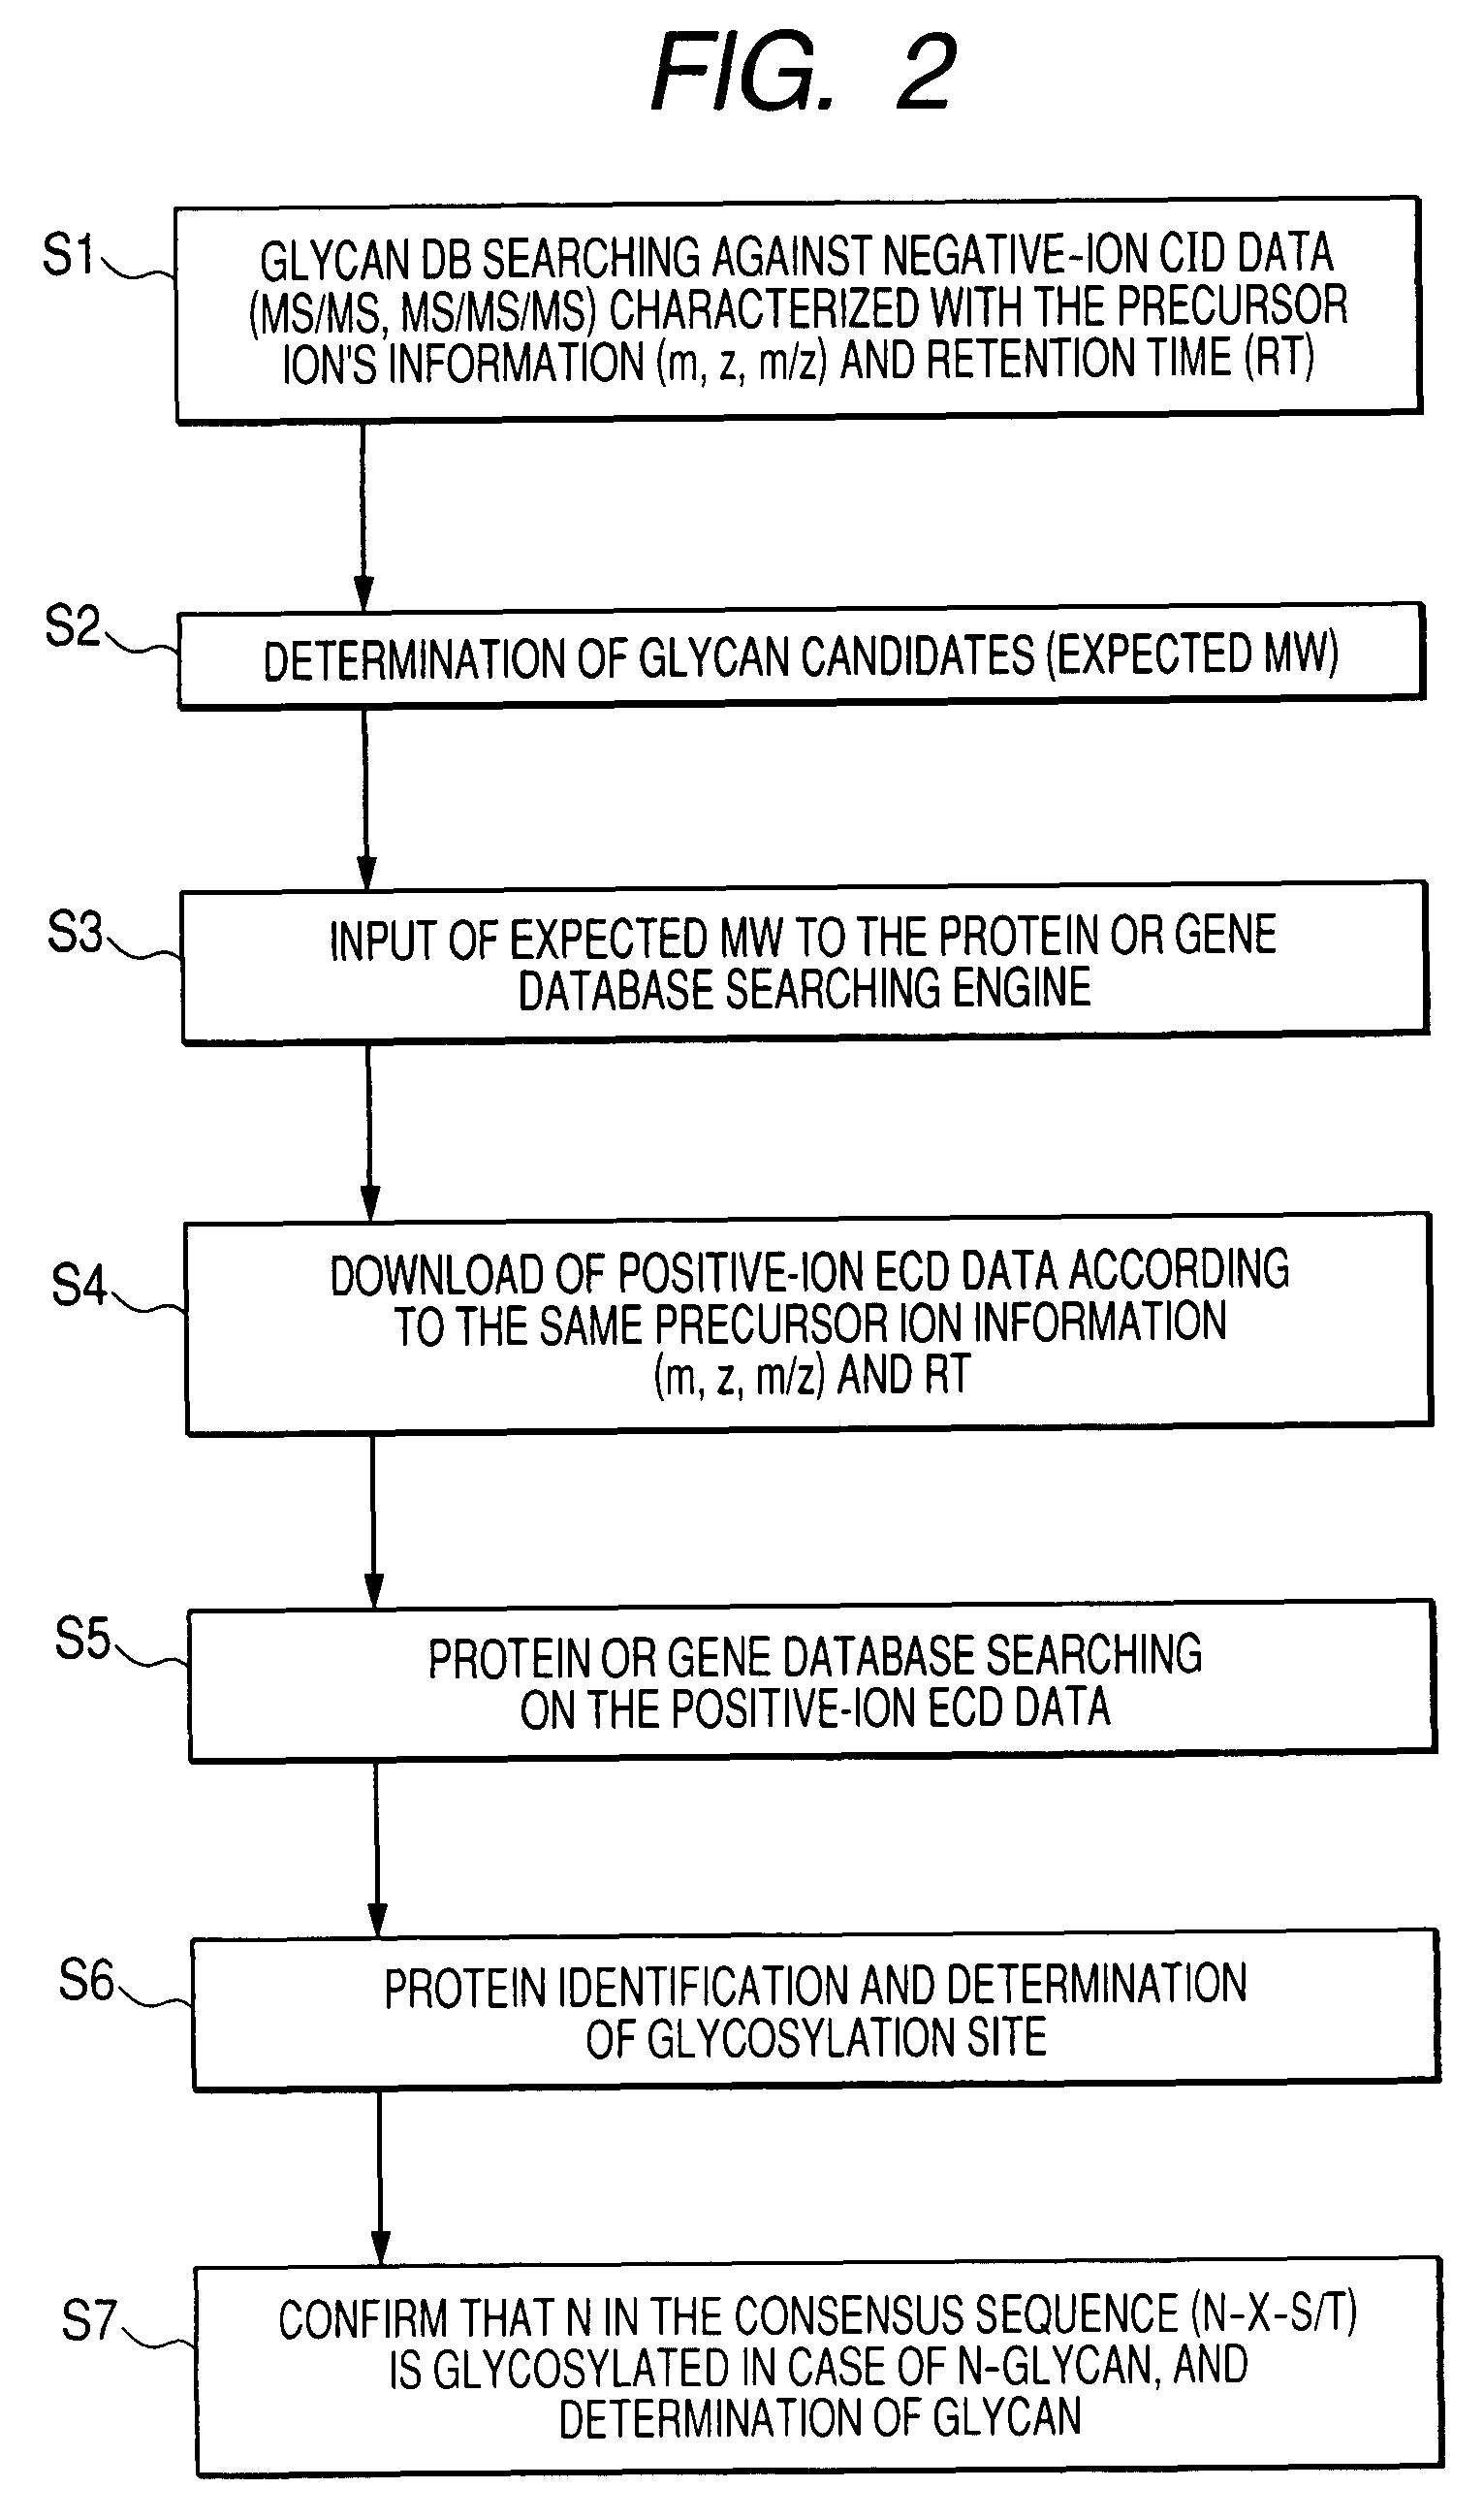 Methods and instruments for identification of glycosylated proteins and peptides